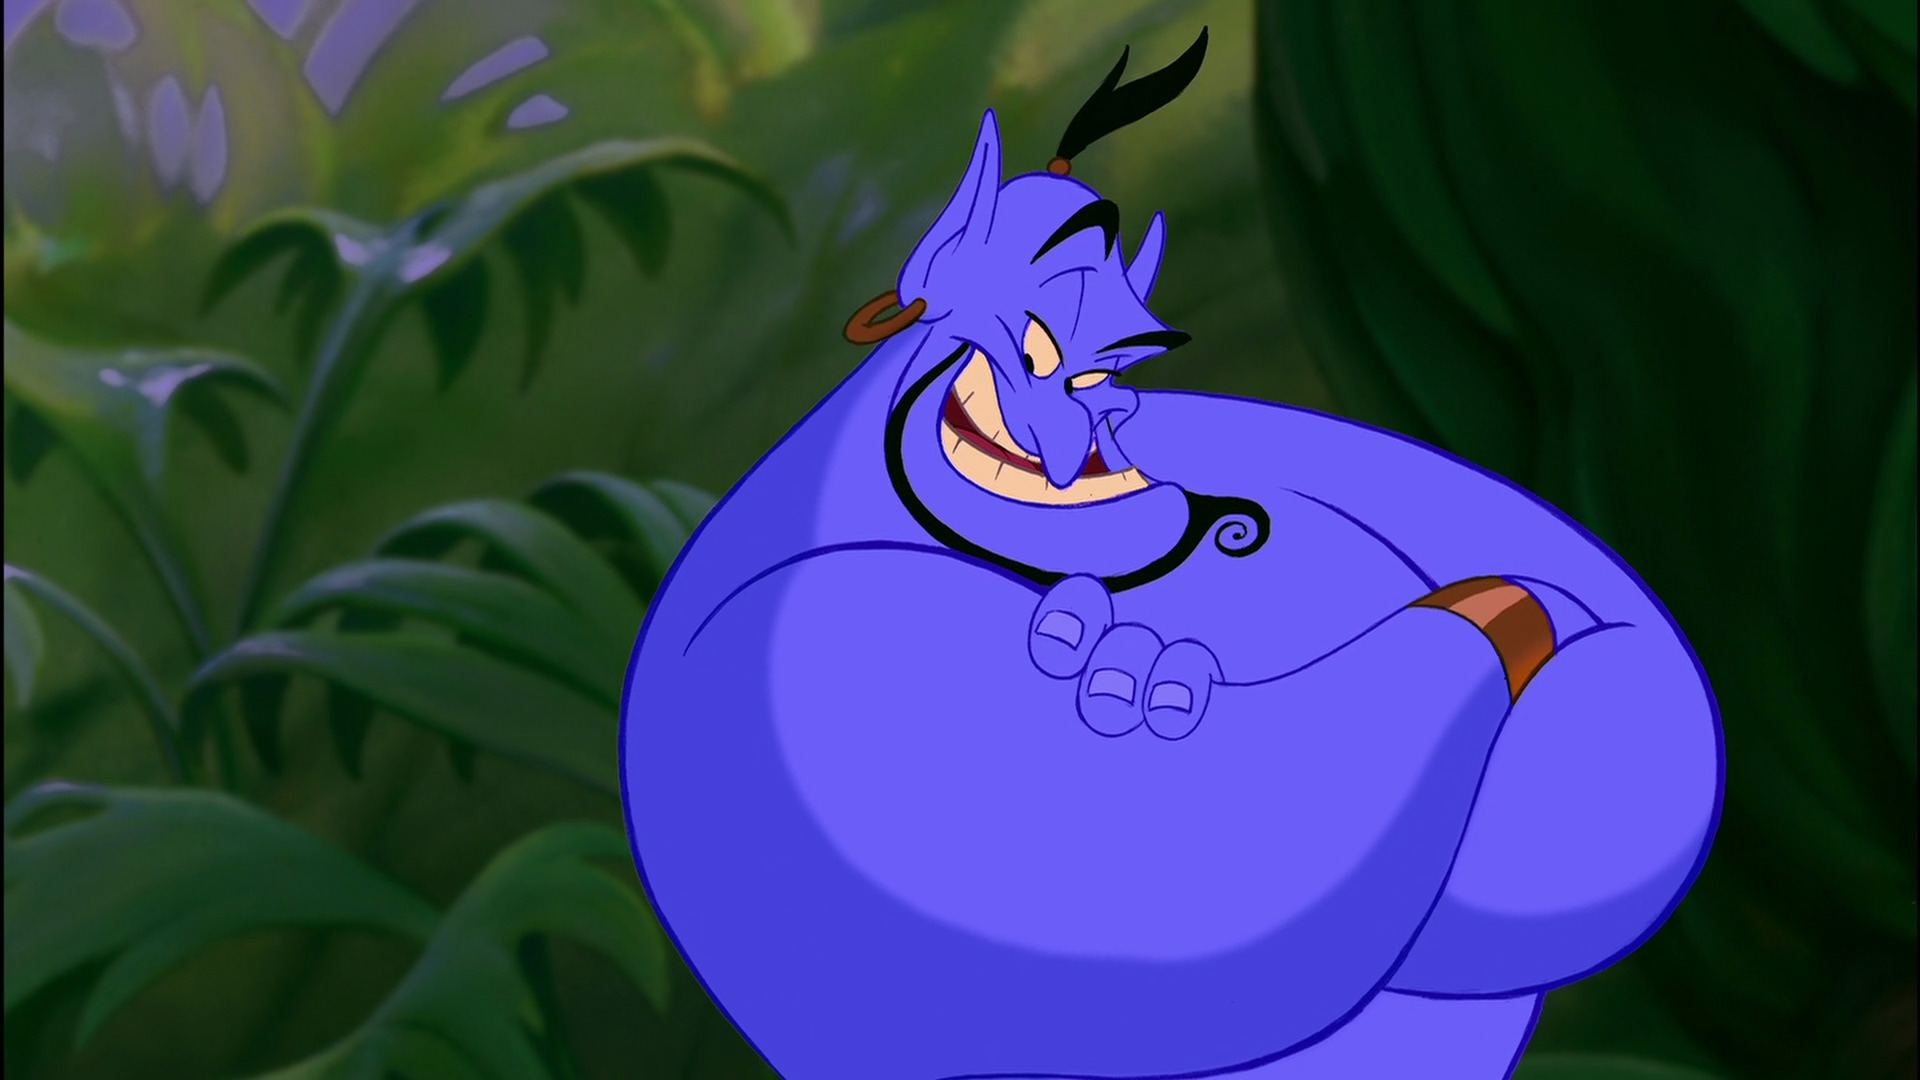 Disney is working on a live action Aladdin Prequel called Genie